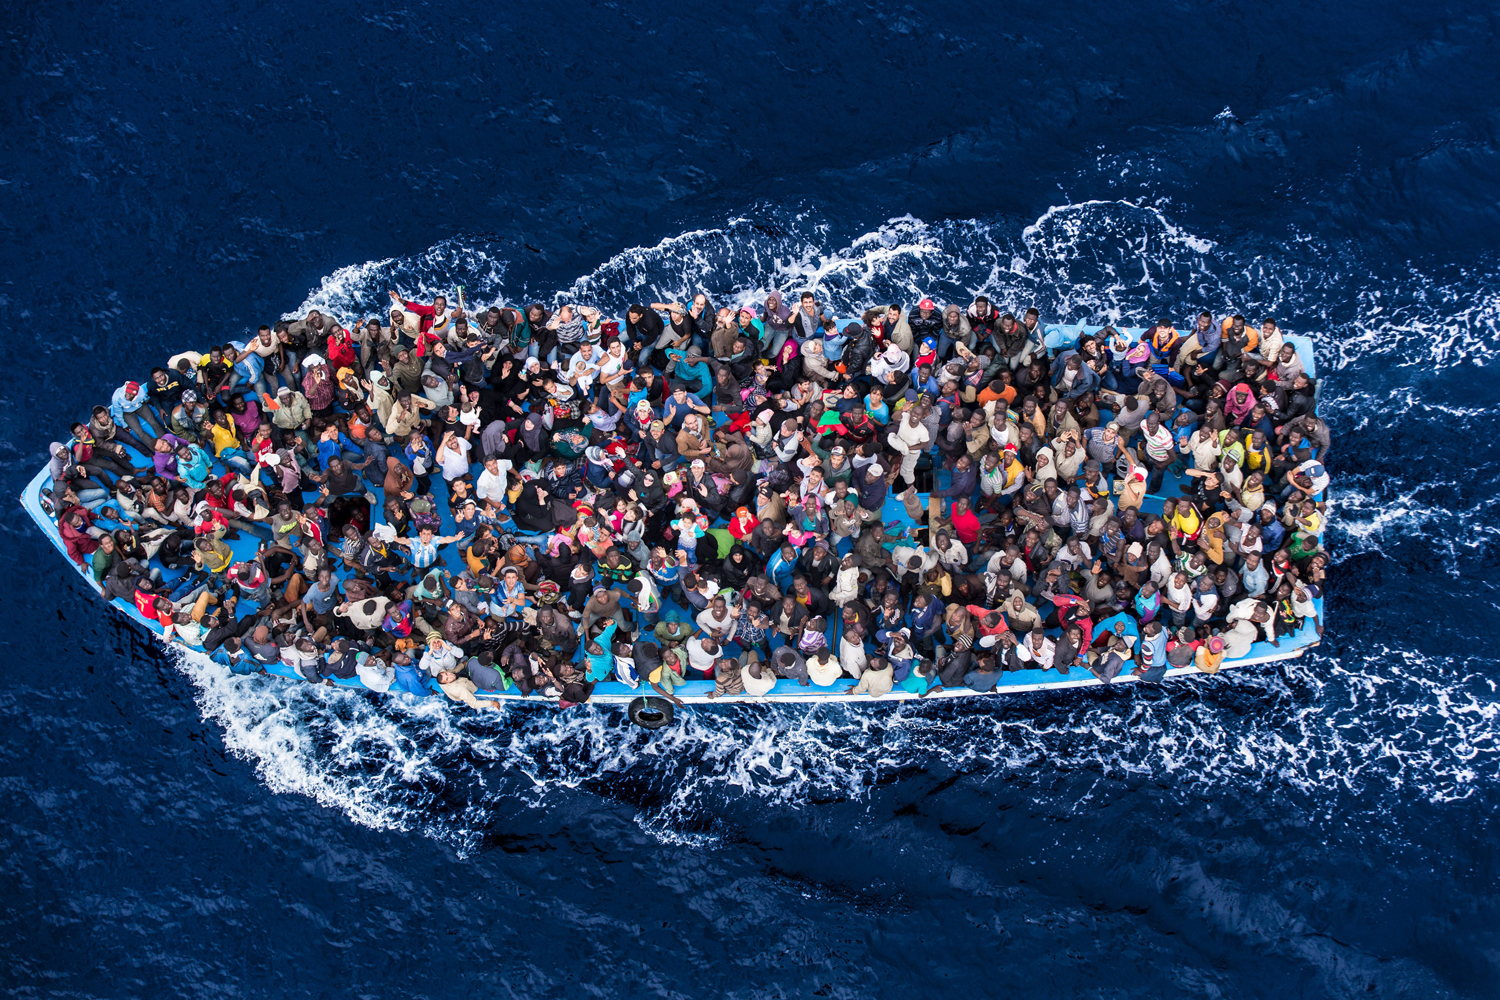 Italian navy rescues asylum seekers traveling by boat off the coast of Africa on the Mediterranean, June 7, 2014. (Massimo Sestini—Polaris)